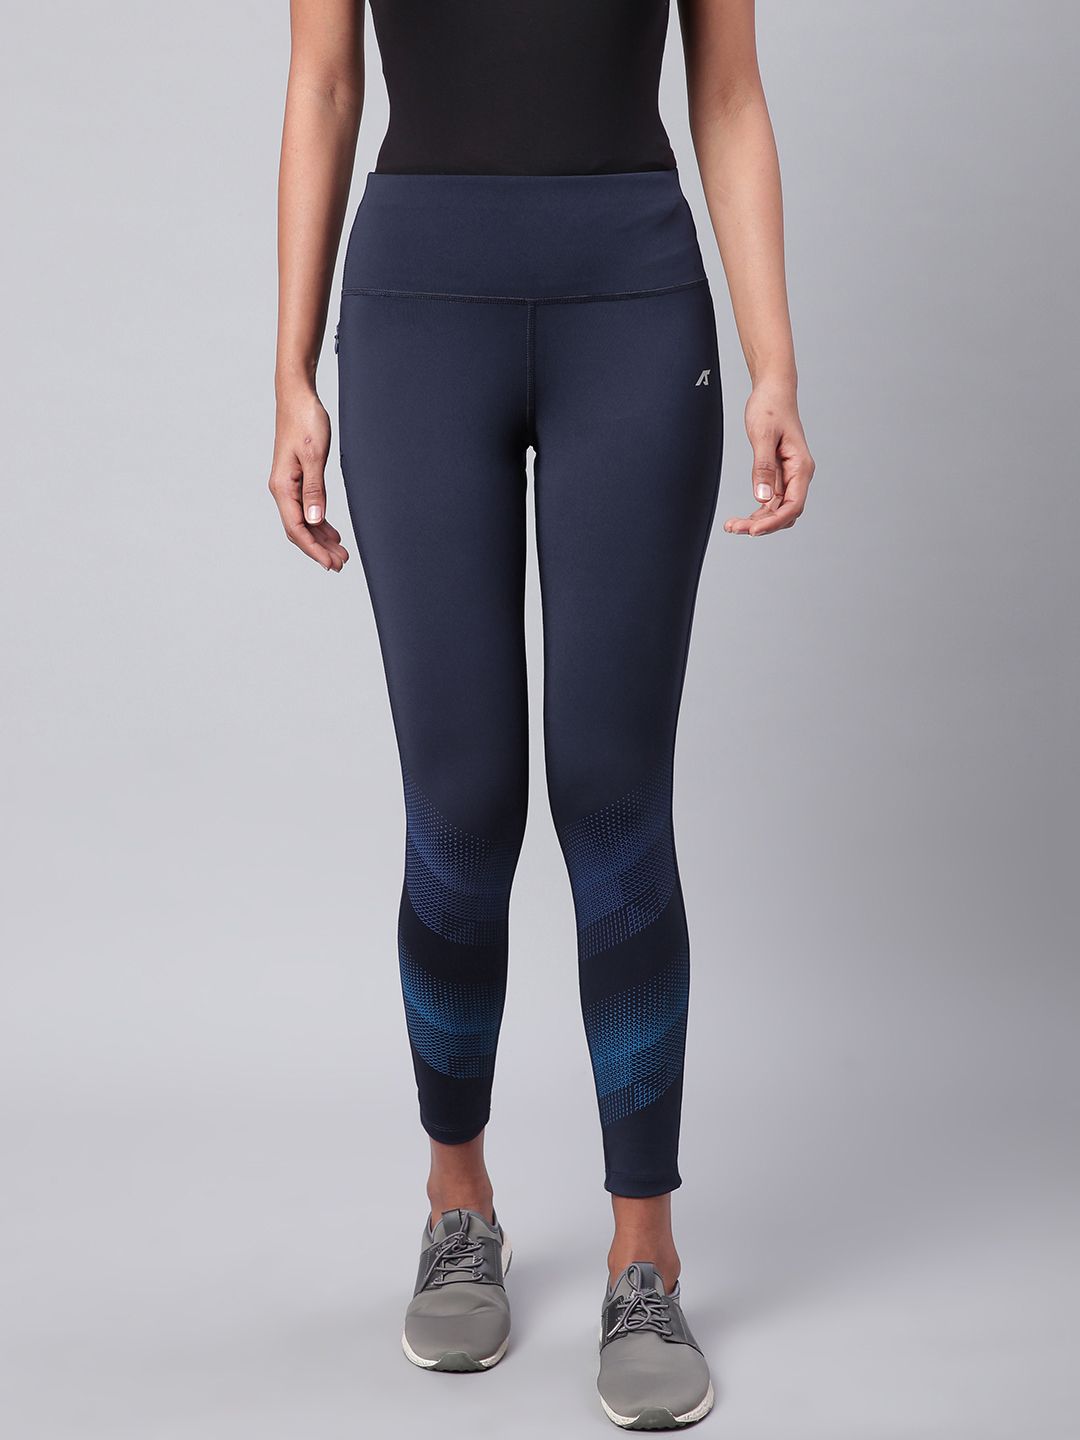 Alcis Women Navy Blue Solid Secure Fit Cropped Training Tights Price in India